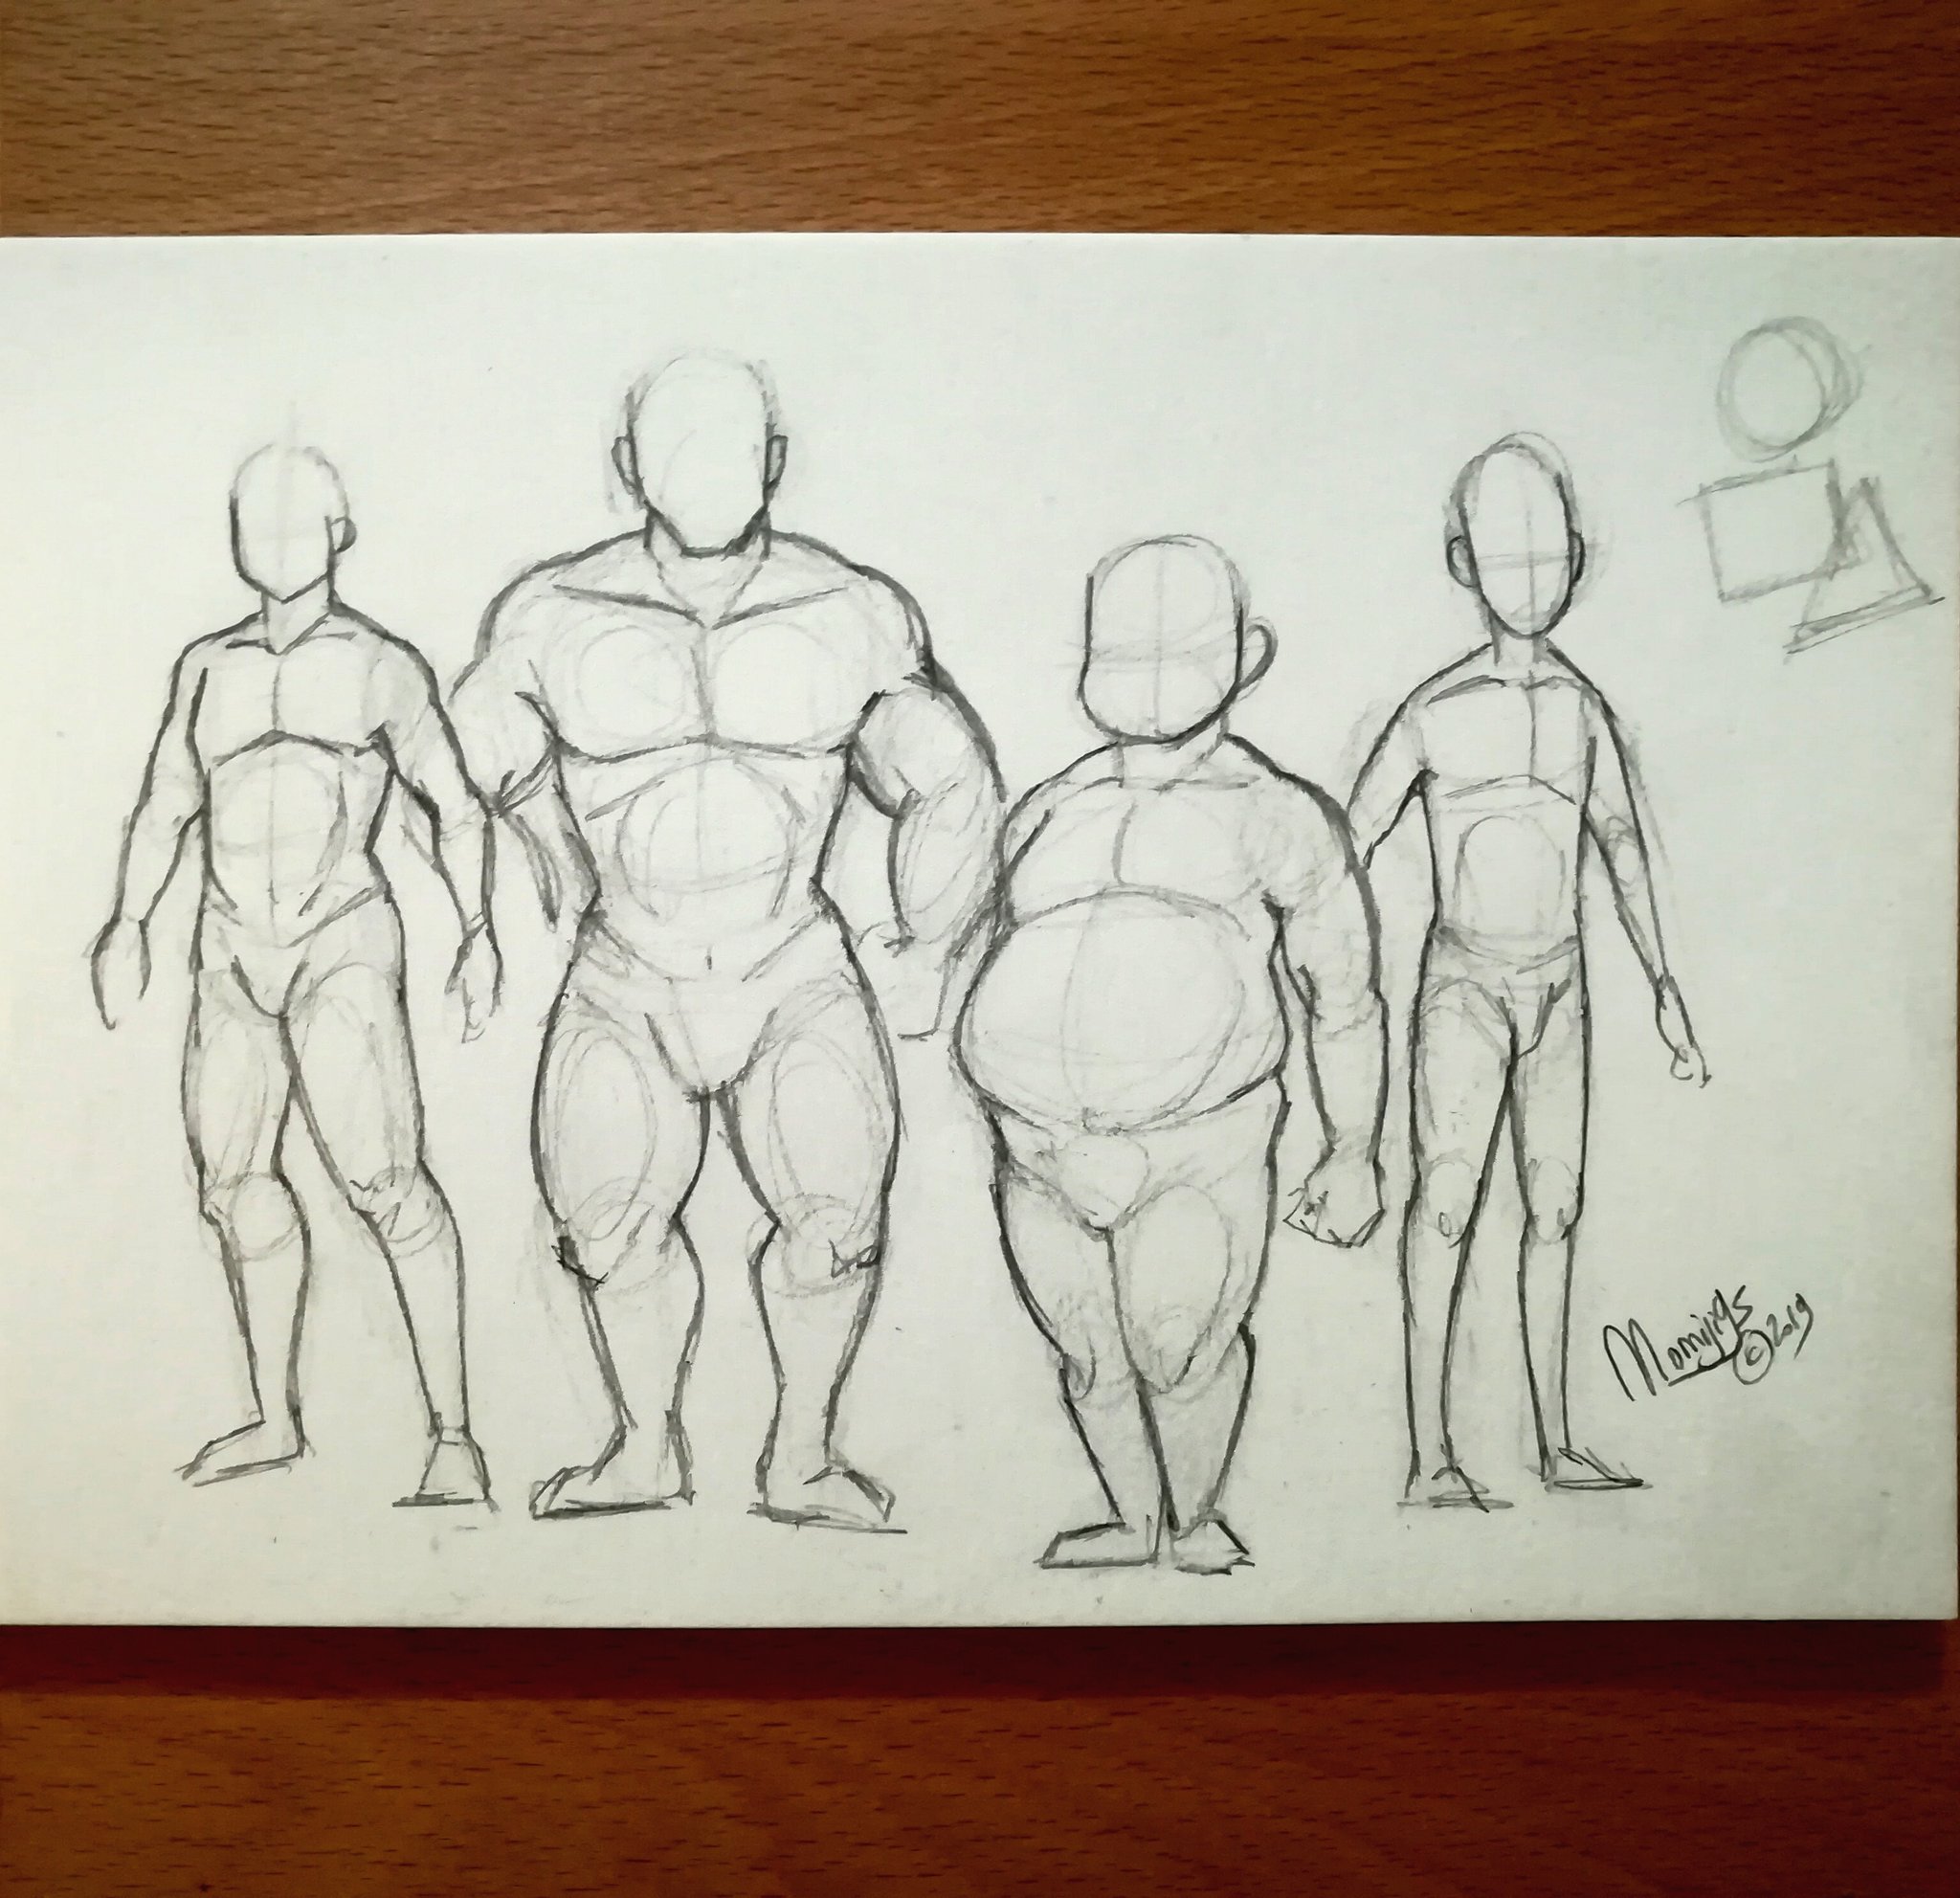 it was a fast tip about basic anatomy drawing. by Caduwardson on DeviantArt